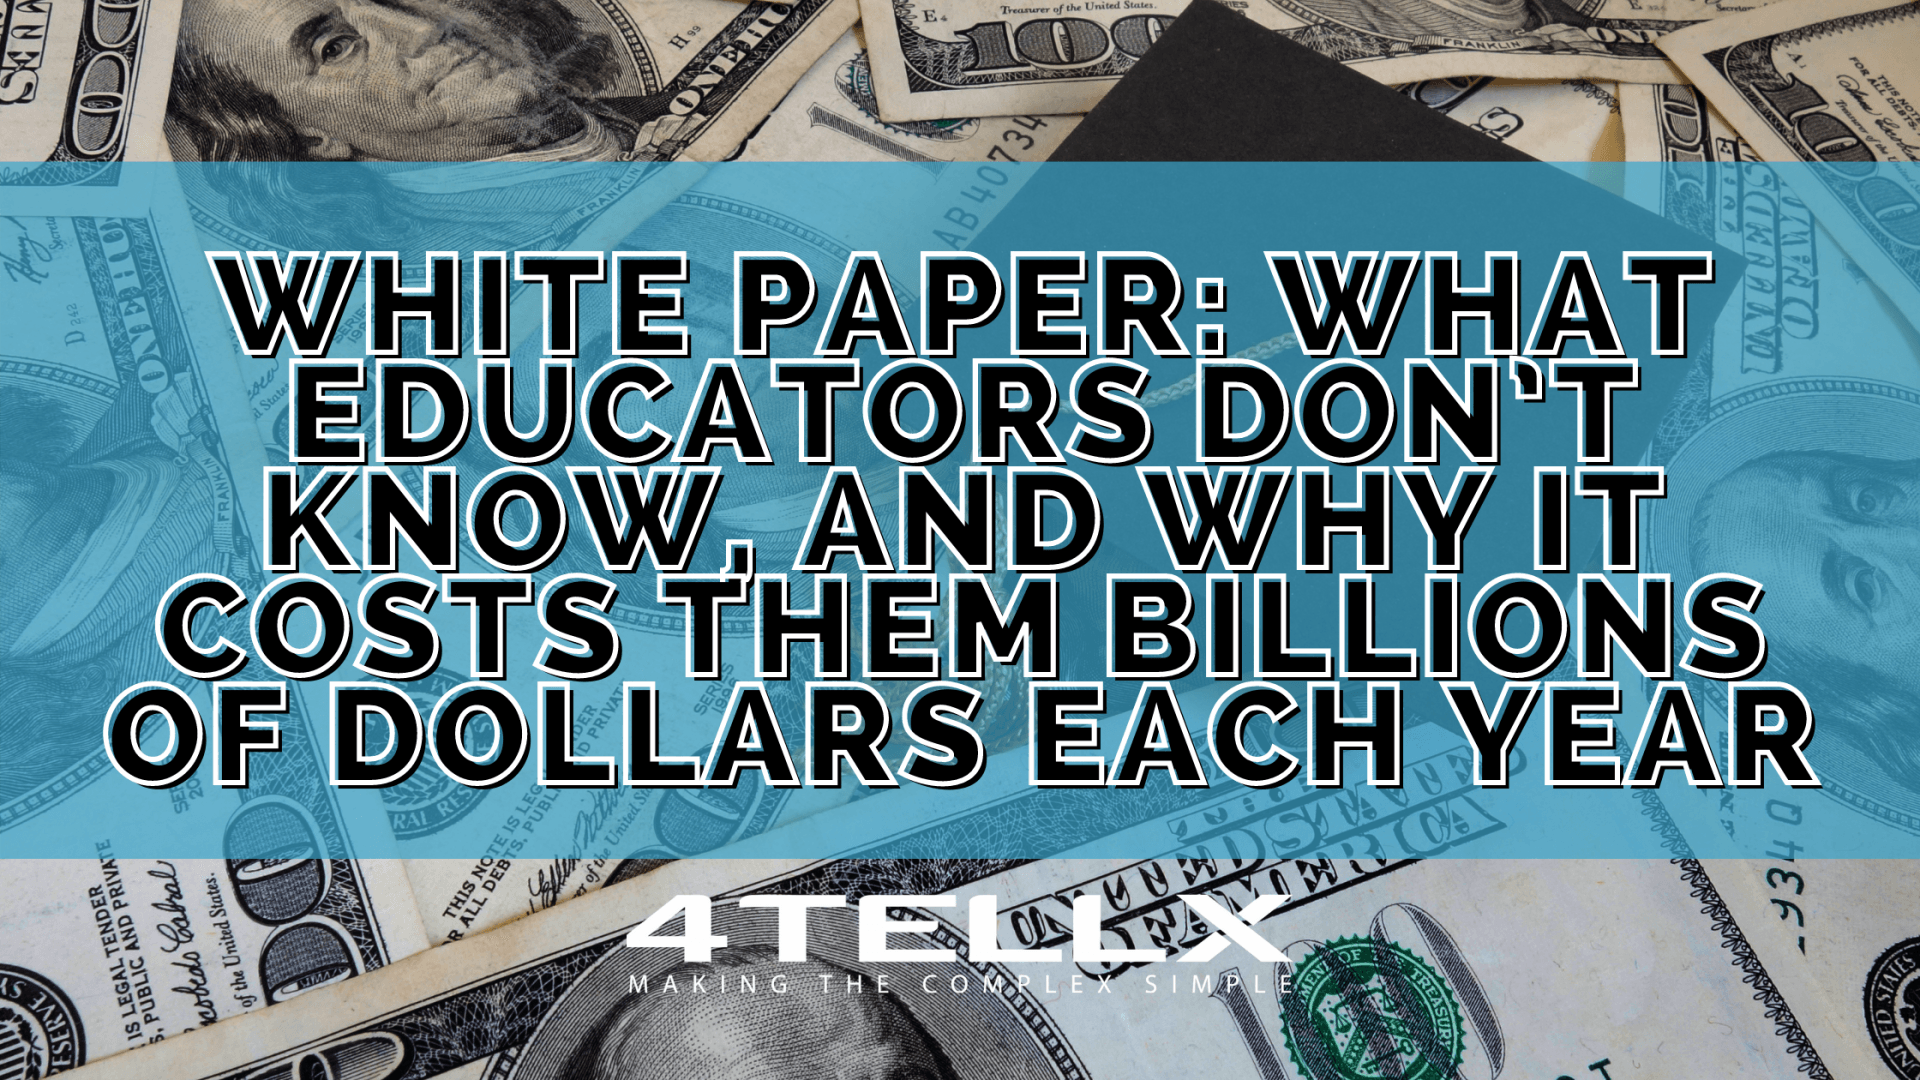 White Paper: What Educators Don’t Know, And Why It Costs Them Billions of Dollars Each Year